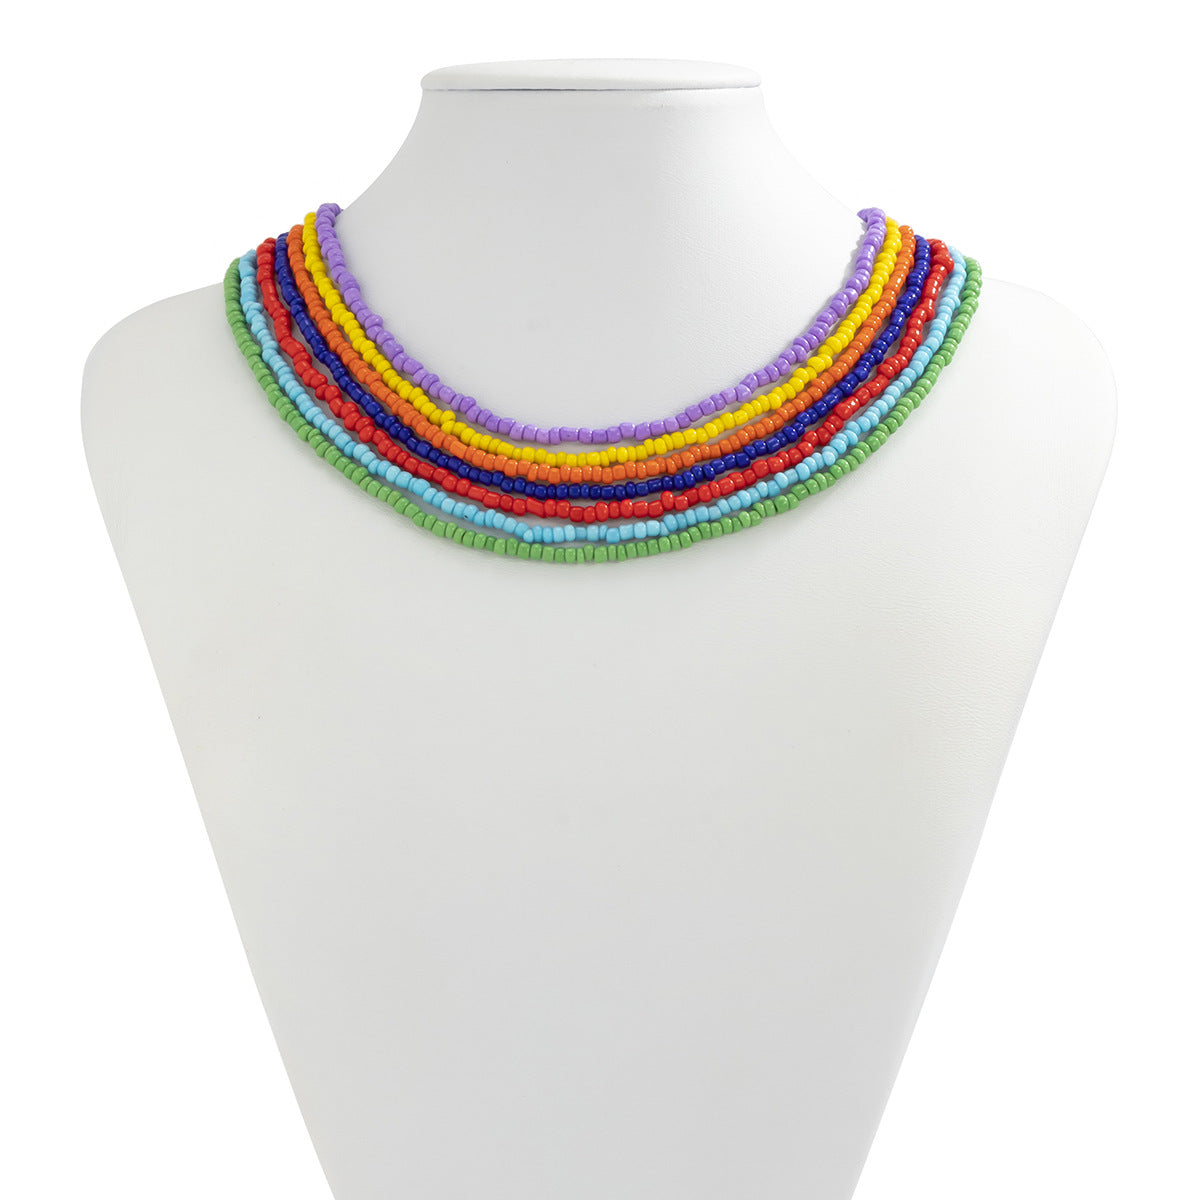 Gorgeous 7-Piece Beaded Necklace Set - Perfect for Women of All Ages!